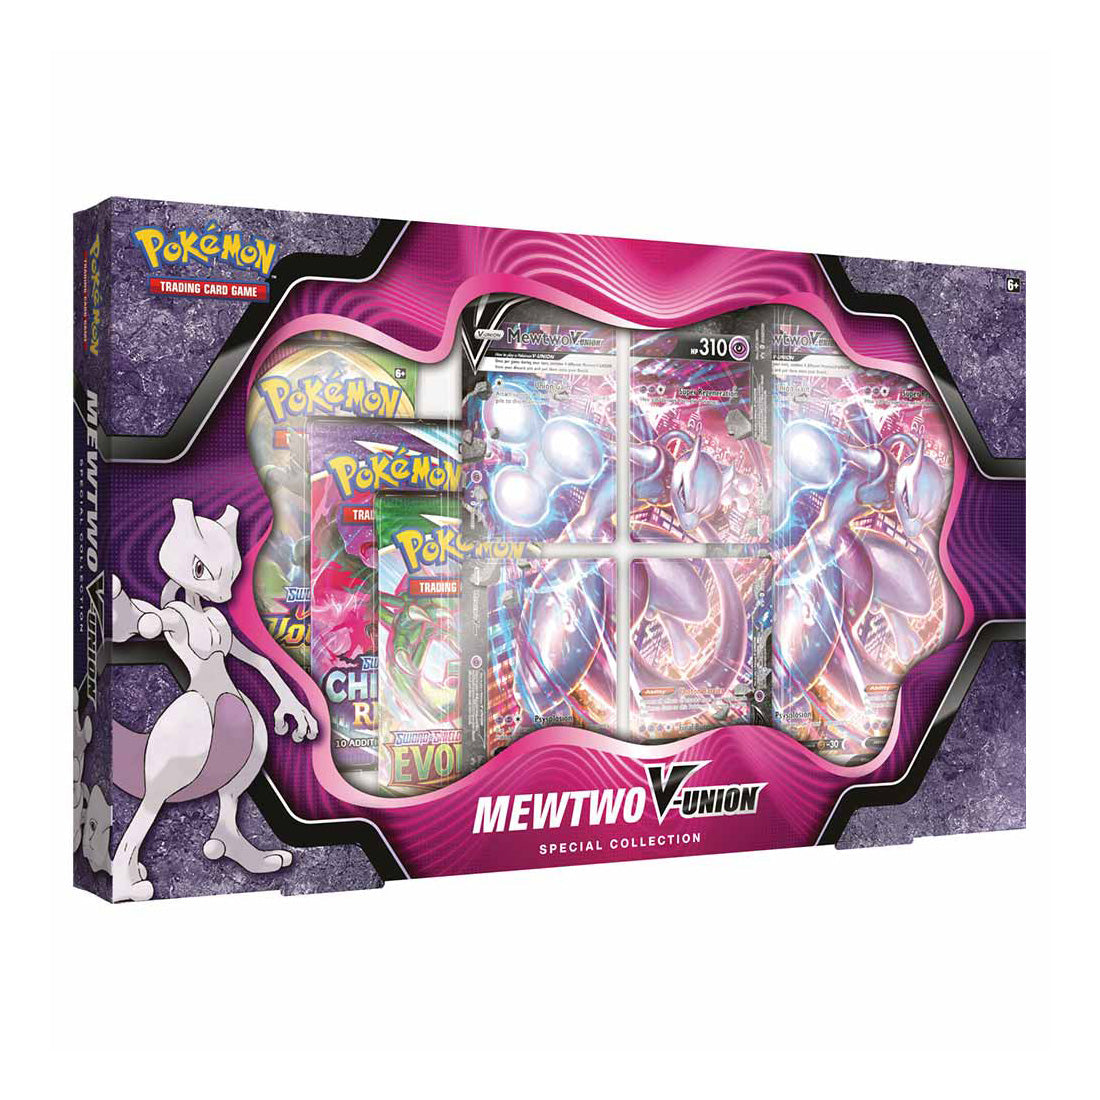 Pokemon TCG - V-Union Special Collection